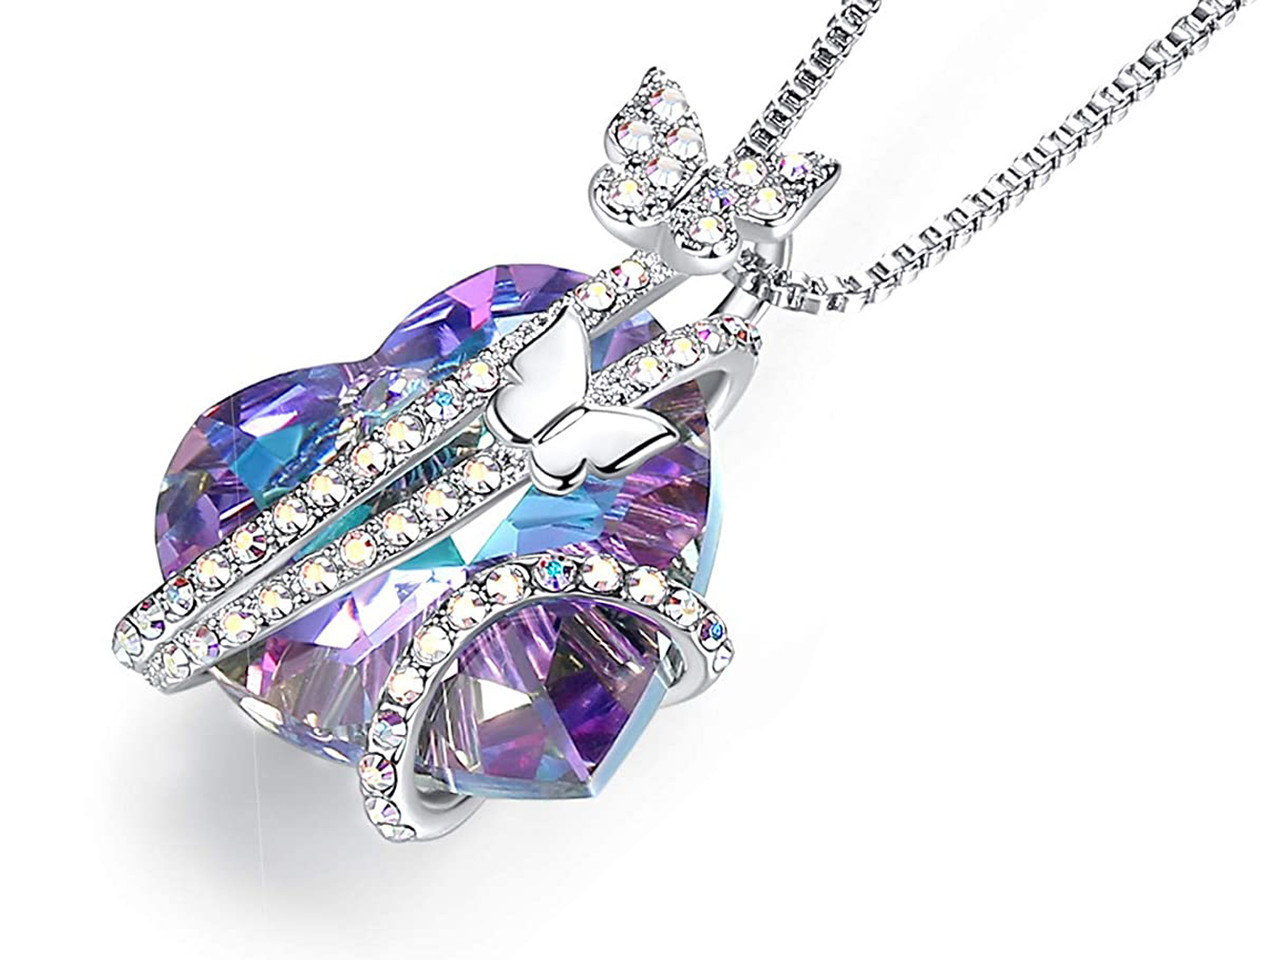 Butterflies on Purple and Blue Heart Crystal Pendant with 18" Chain Necklace. Gift Butterfly Necklace for Women. 